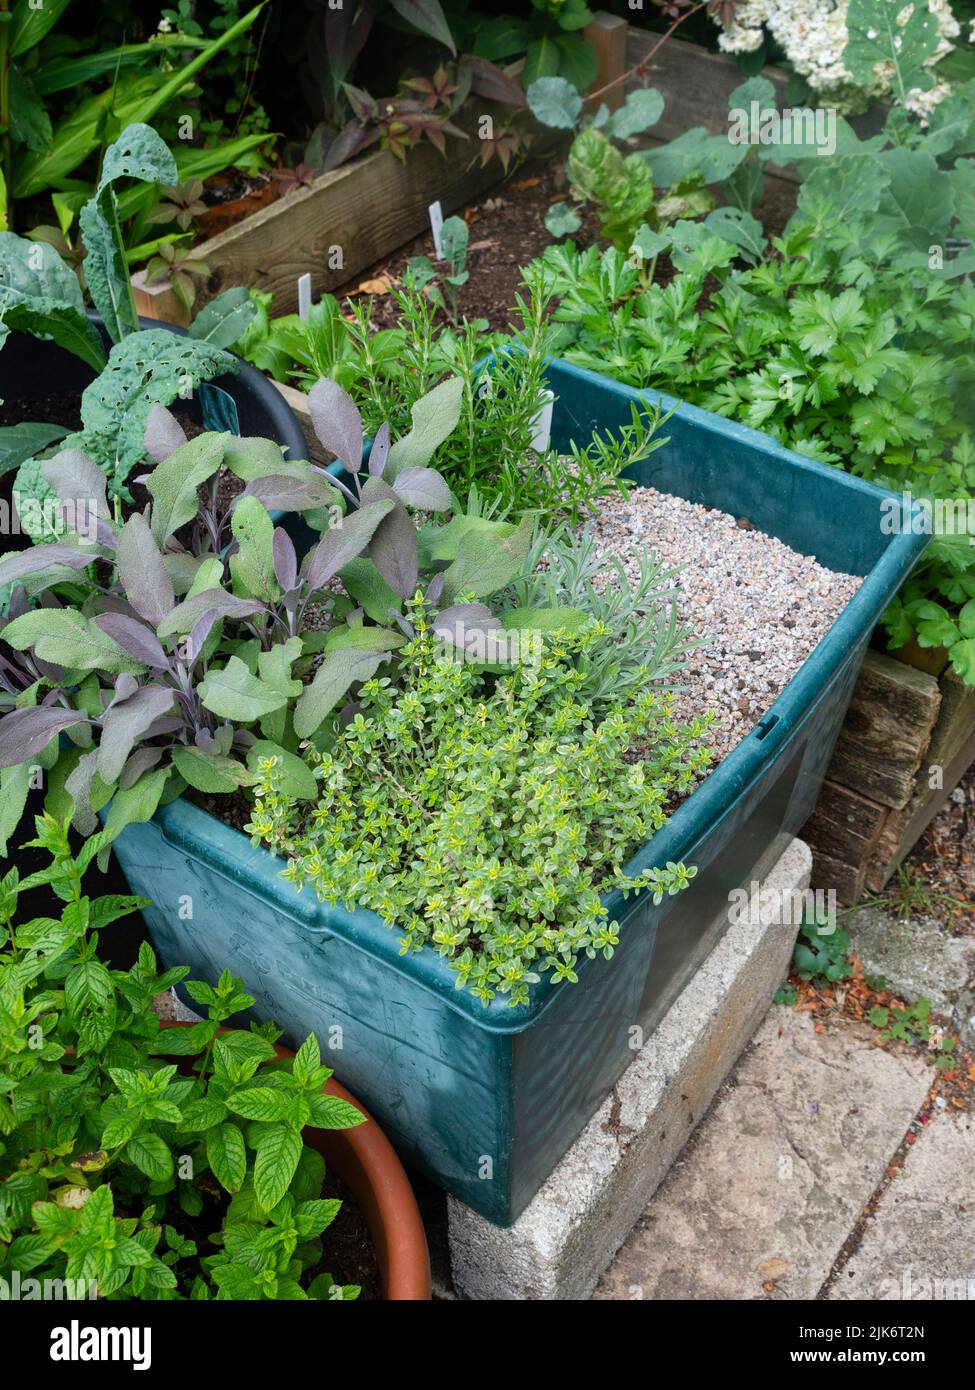 Small scale container herb garden with garden mint, lemon thyme, purple sage, rosemary and parsley Stock Photo